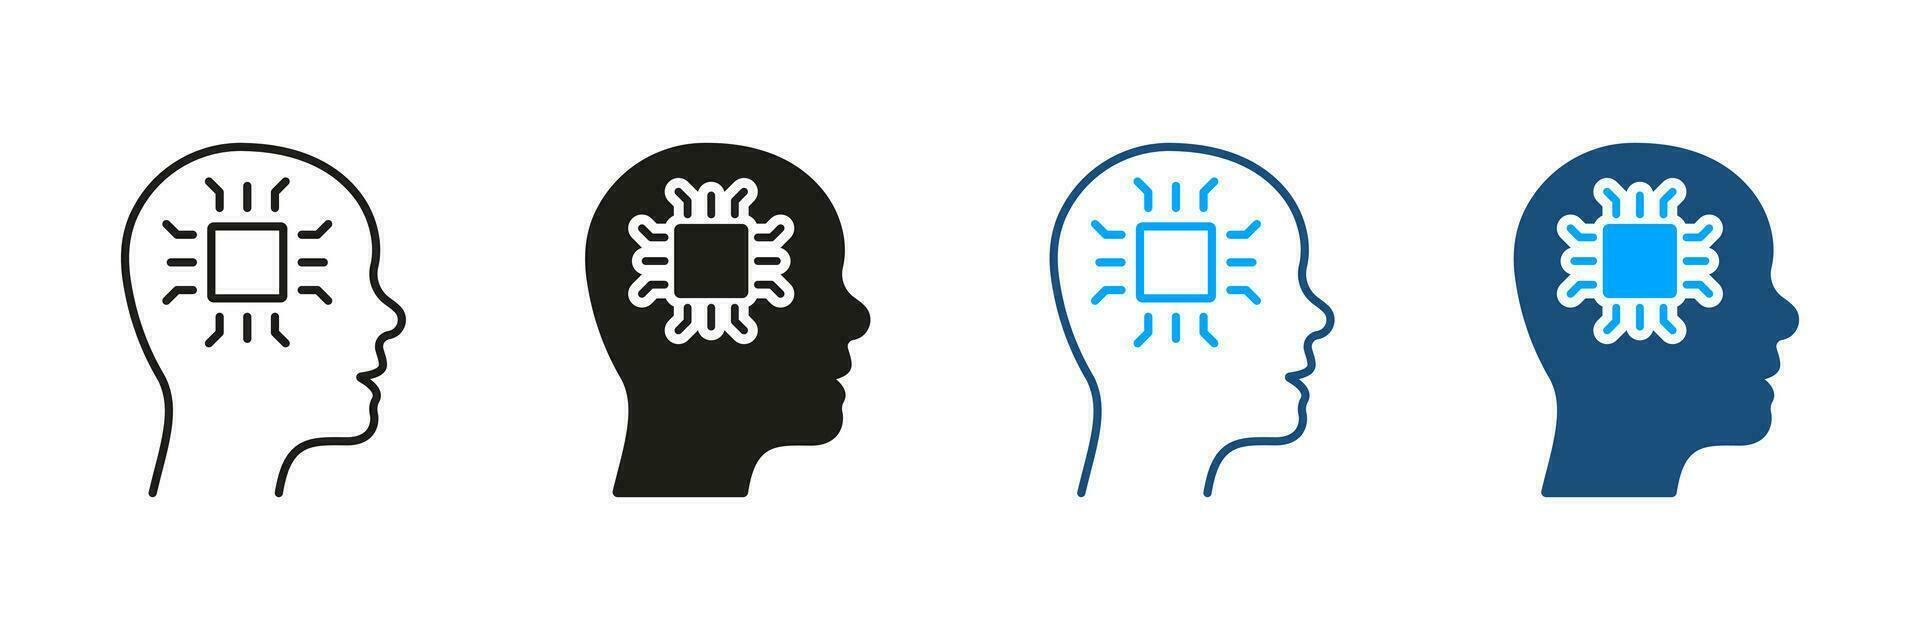 Innovation Neuroscience AI Concept Pictogram. Human Head and Chip Technology Silhouette and Line Icons Set. Artificial Intelligence Black and Color Symbol Collection. Isolated Vector Illustration.